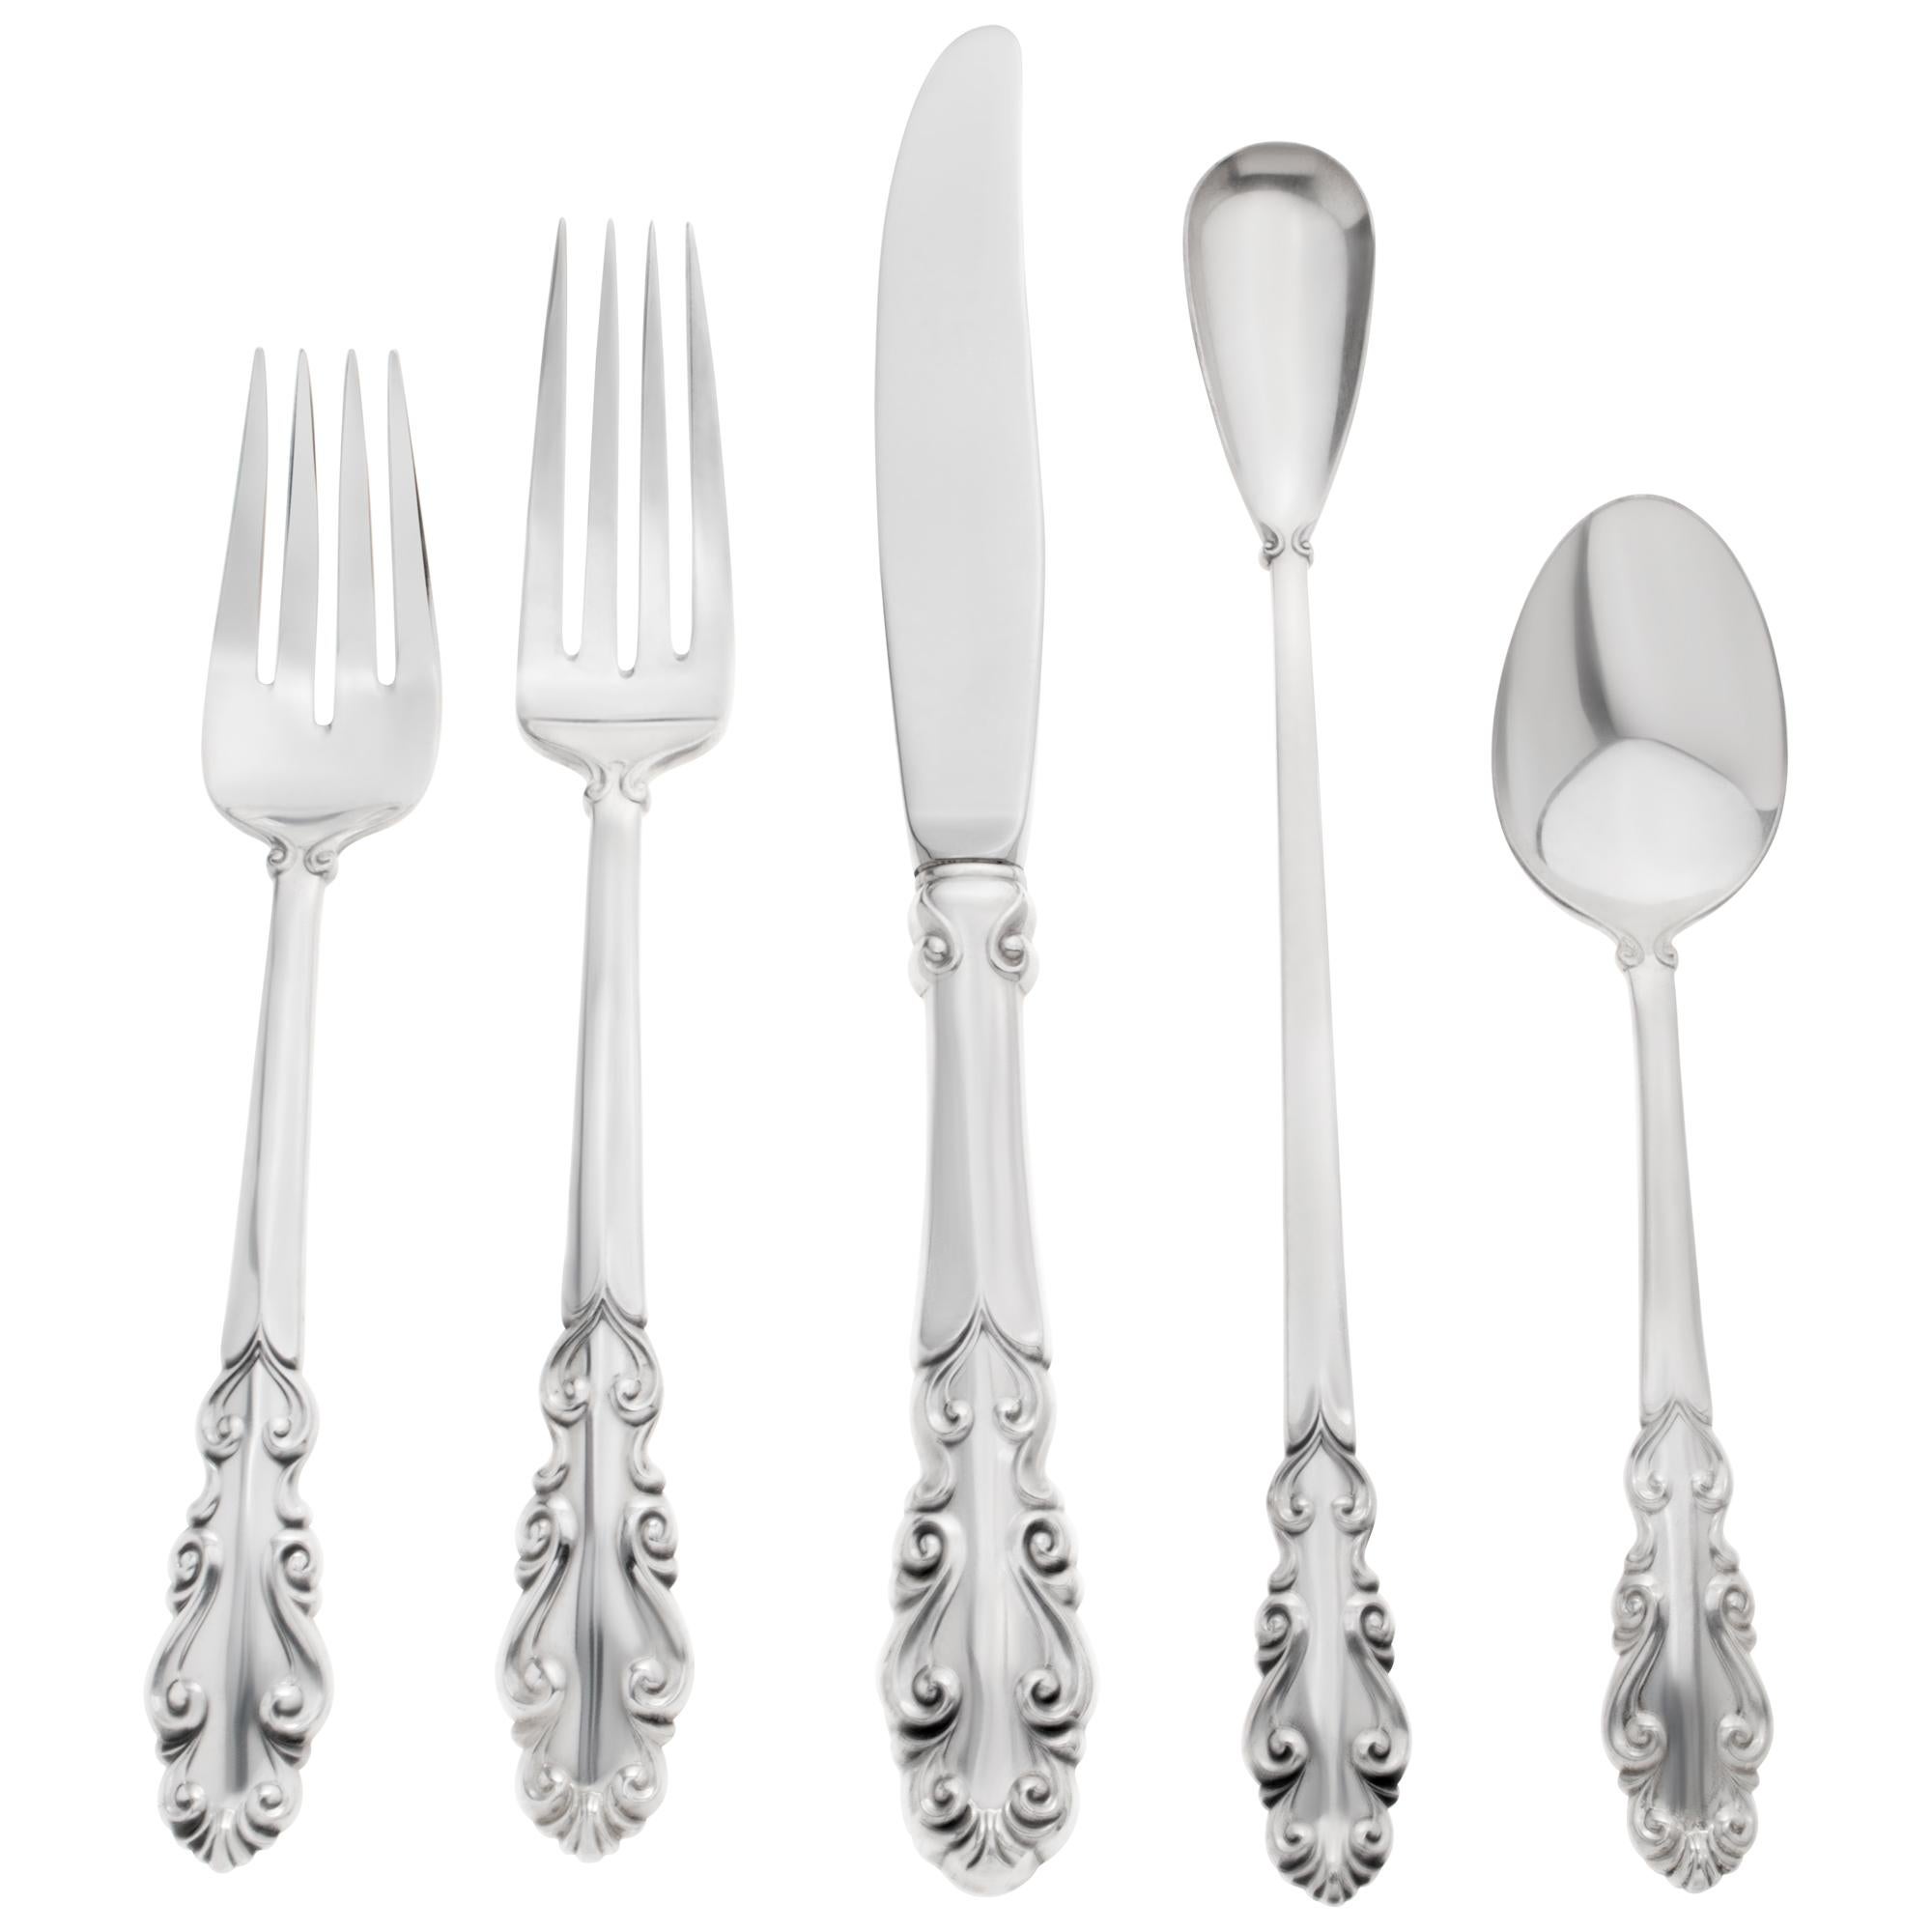 ESPLANADE Sterling silver flatware set patented in 1952 by Towle Silversmiths. 5 place settings for 12. 66 pieces total. Over 67 troy ounces .925 sterling silver (counting stainless steel blade pieces as 1.00 ozt each). PLACE SETTING: 12 dinner